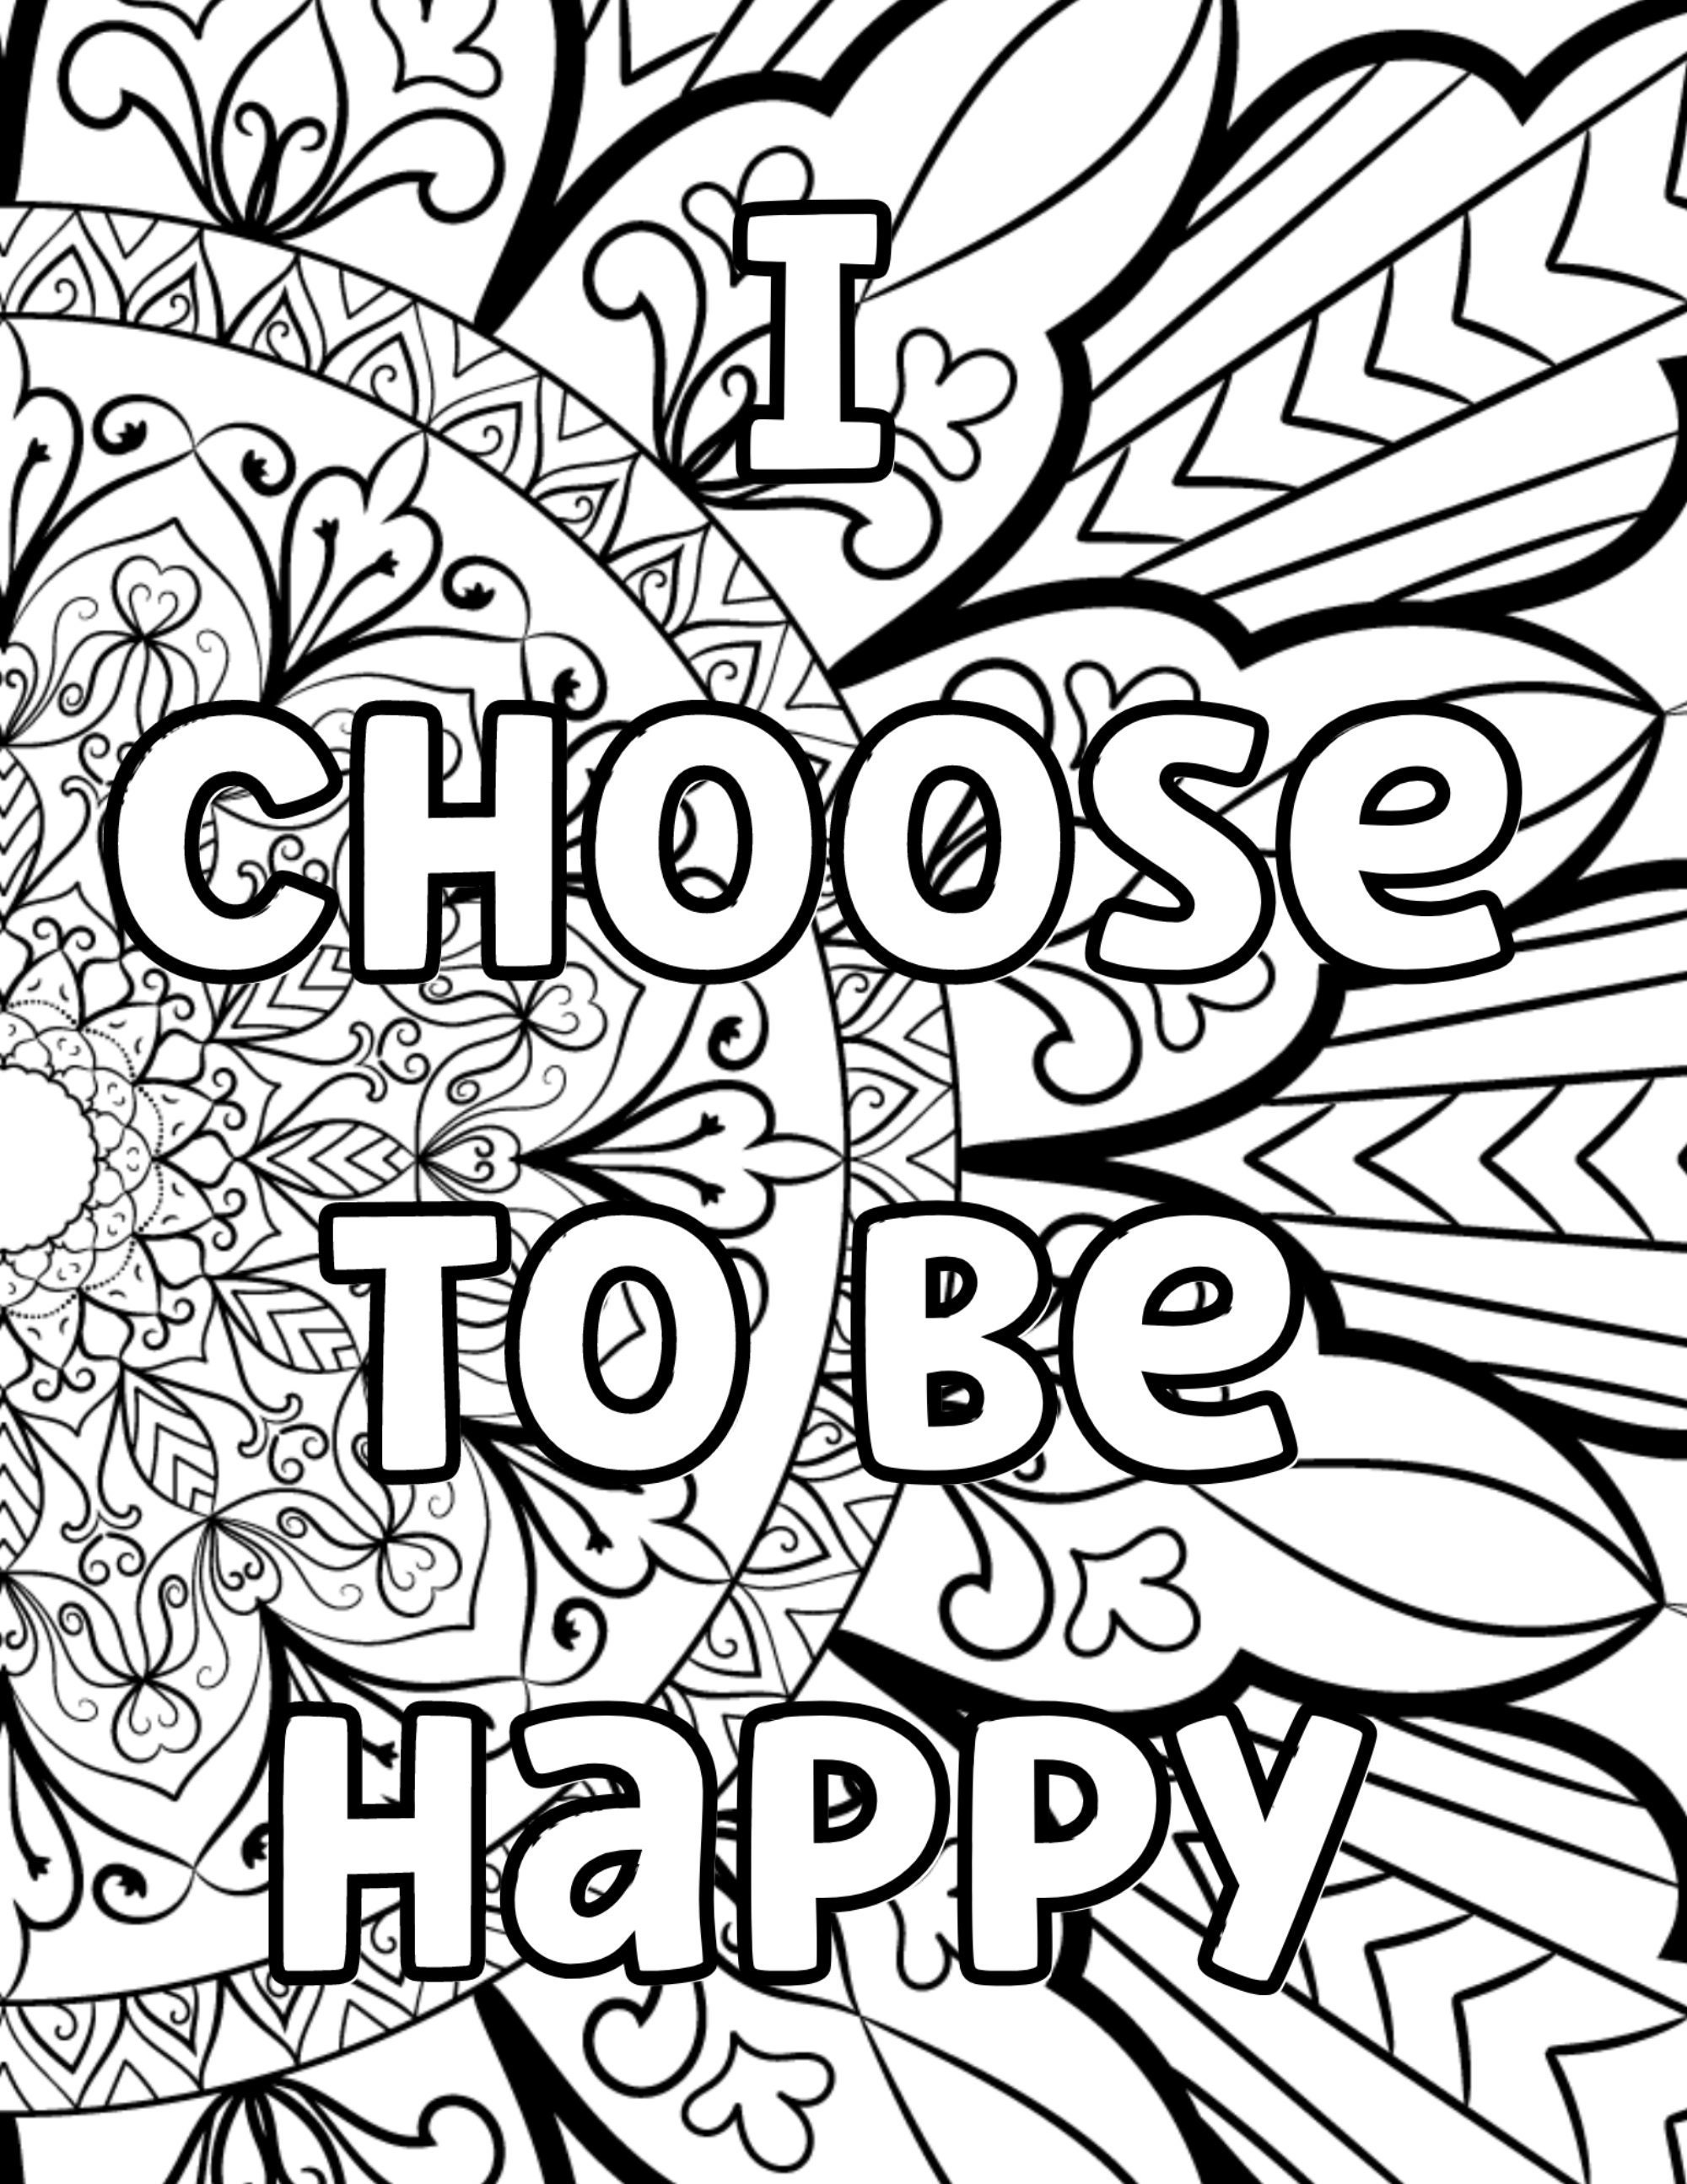 Positive affirmation coloring page for anti anxiety i choose to be happy self caretherapy resourceactivity book download now